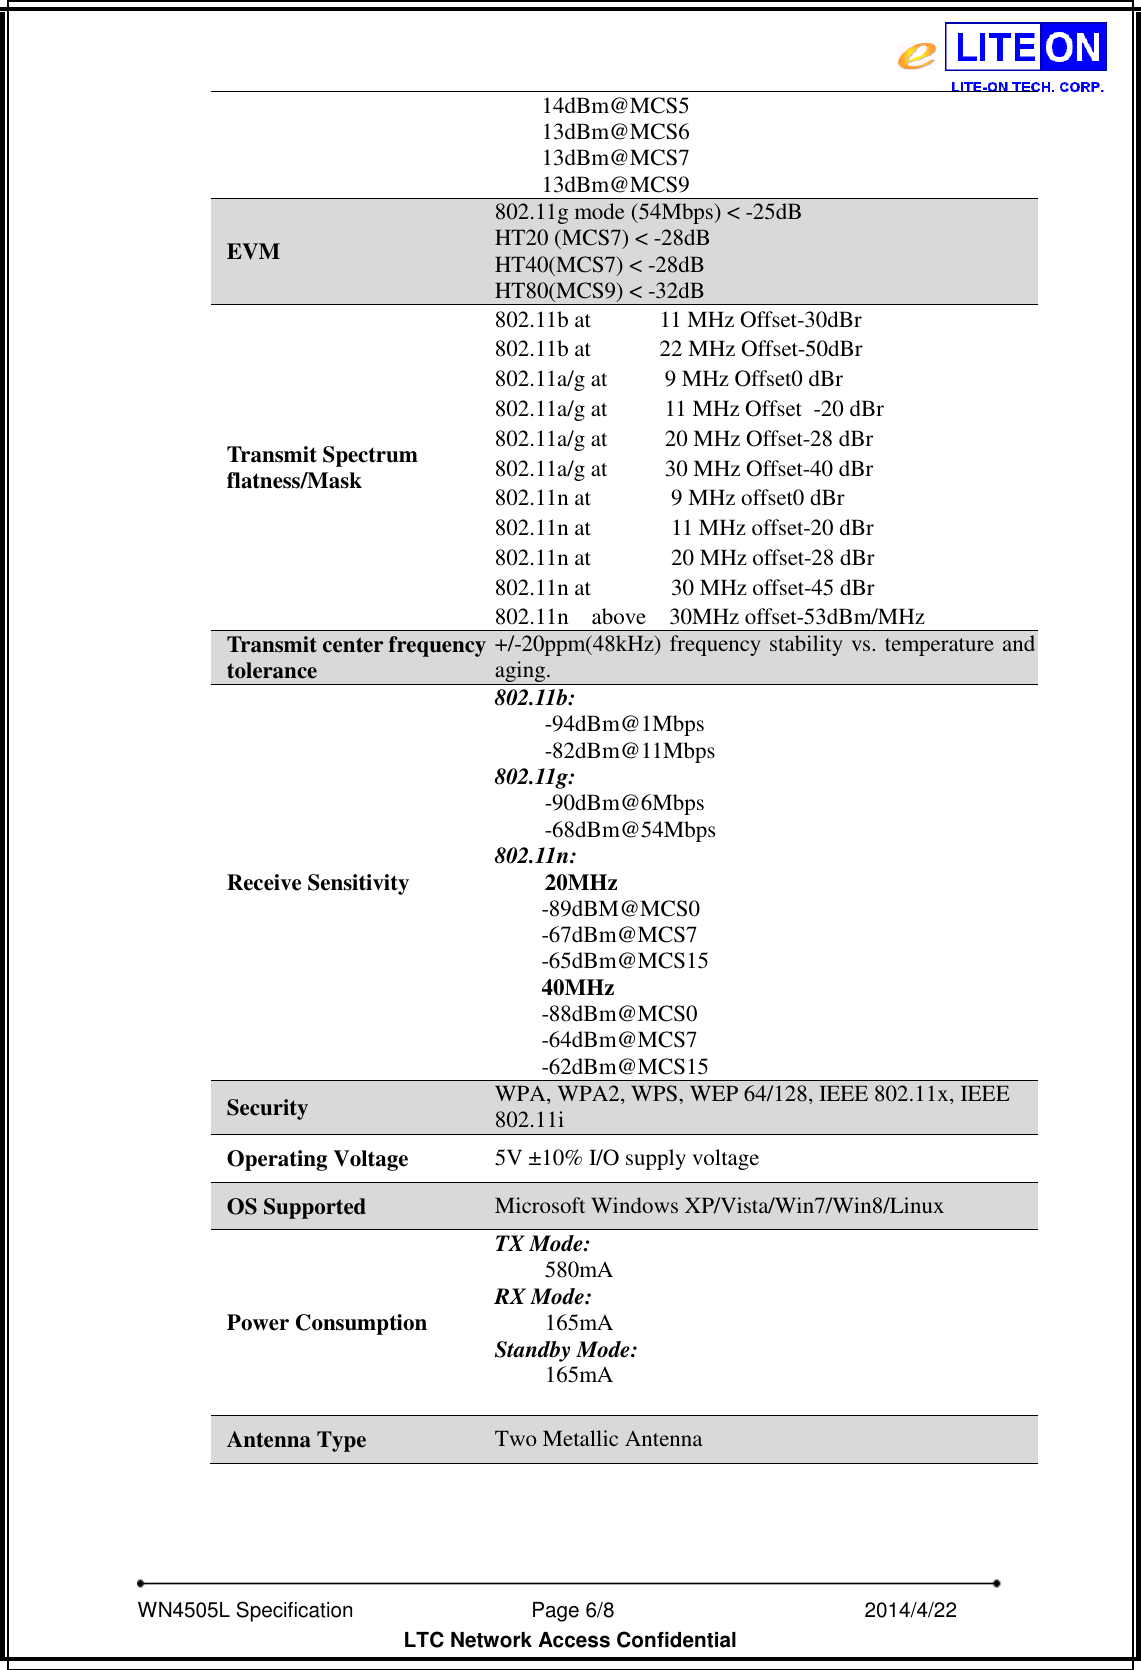   WN4505L Specification                              Page 6/8                                                2014/4/22   LTC Network Access Confidential 14dBm@MCS5 13dBm@MCS6 13dBm@MCS7 13dBm@MCS9 EVM 802.11g mode (54Mbps) &lt; -25dB HT20 (MCS7) &lt; -28dB HT40(MCS7) &lt; -28dB HT80(MCS9) &lt; -32dB Transmit Spectrum flatness/Mask 802.11b at      11 MHz Offset -30dBr 802.11b at      22 MHz Offset-50dBr 802.11a/g at      9 MHz Offset0 dBr 802.11a/g at      11 MHz Offset   -20 dBr 802.11a/g at      20 MHz Offset-28 dBr 802.11a/g at      30 MHz Offset-40 dBr 802.11n at          9 MHz offset0 dBr 802.11n at          11 MHz offset-20 dBr 802.11n at          20 MHz offset-28 dBr 802.11n at          30 MHz offset-45 dBr 802.11n    above    30MHz offset-53dBm/MHz Transmit center frequency tolerance +/-20ppm(48kHz) frequency stability vs. temperature and aging. Receive Sensitivity 802.11b: -94dBm@1Mbps -82dBm@11Mbps 802.11g: -90dBm@6Mbps -68dBm@54Mbps 802.11n: 20MHz   -89dBM@MCS0 -67dBm@MCS7 -65dBm@MCS15 40MHz -88dBm@MCS0 -64dBm@MCS7 -62dBm@MCS15 Security WPA, WPA2, WPS, WEP 64/128, IEEE 802.11x, IEEE 802.11i Operating Voltage 5V ±10% I/O supply voltage OS Supported Microsoft Windows XP/Vista/Win7/Win8/Linux Power Consumption TX Mode: 580mA RX Mode: 165mA Standby Mode: 165mA  Antenna Type Two Metallic Antenna  